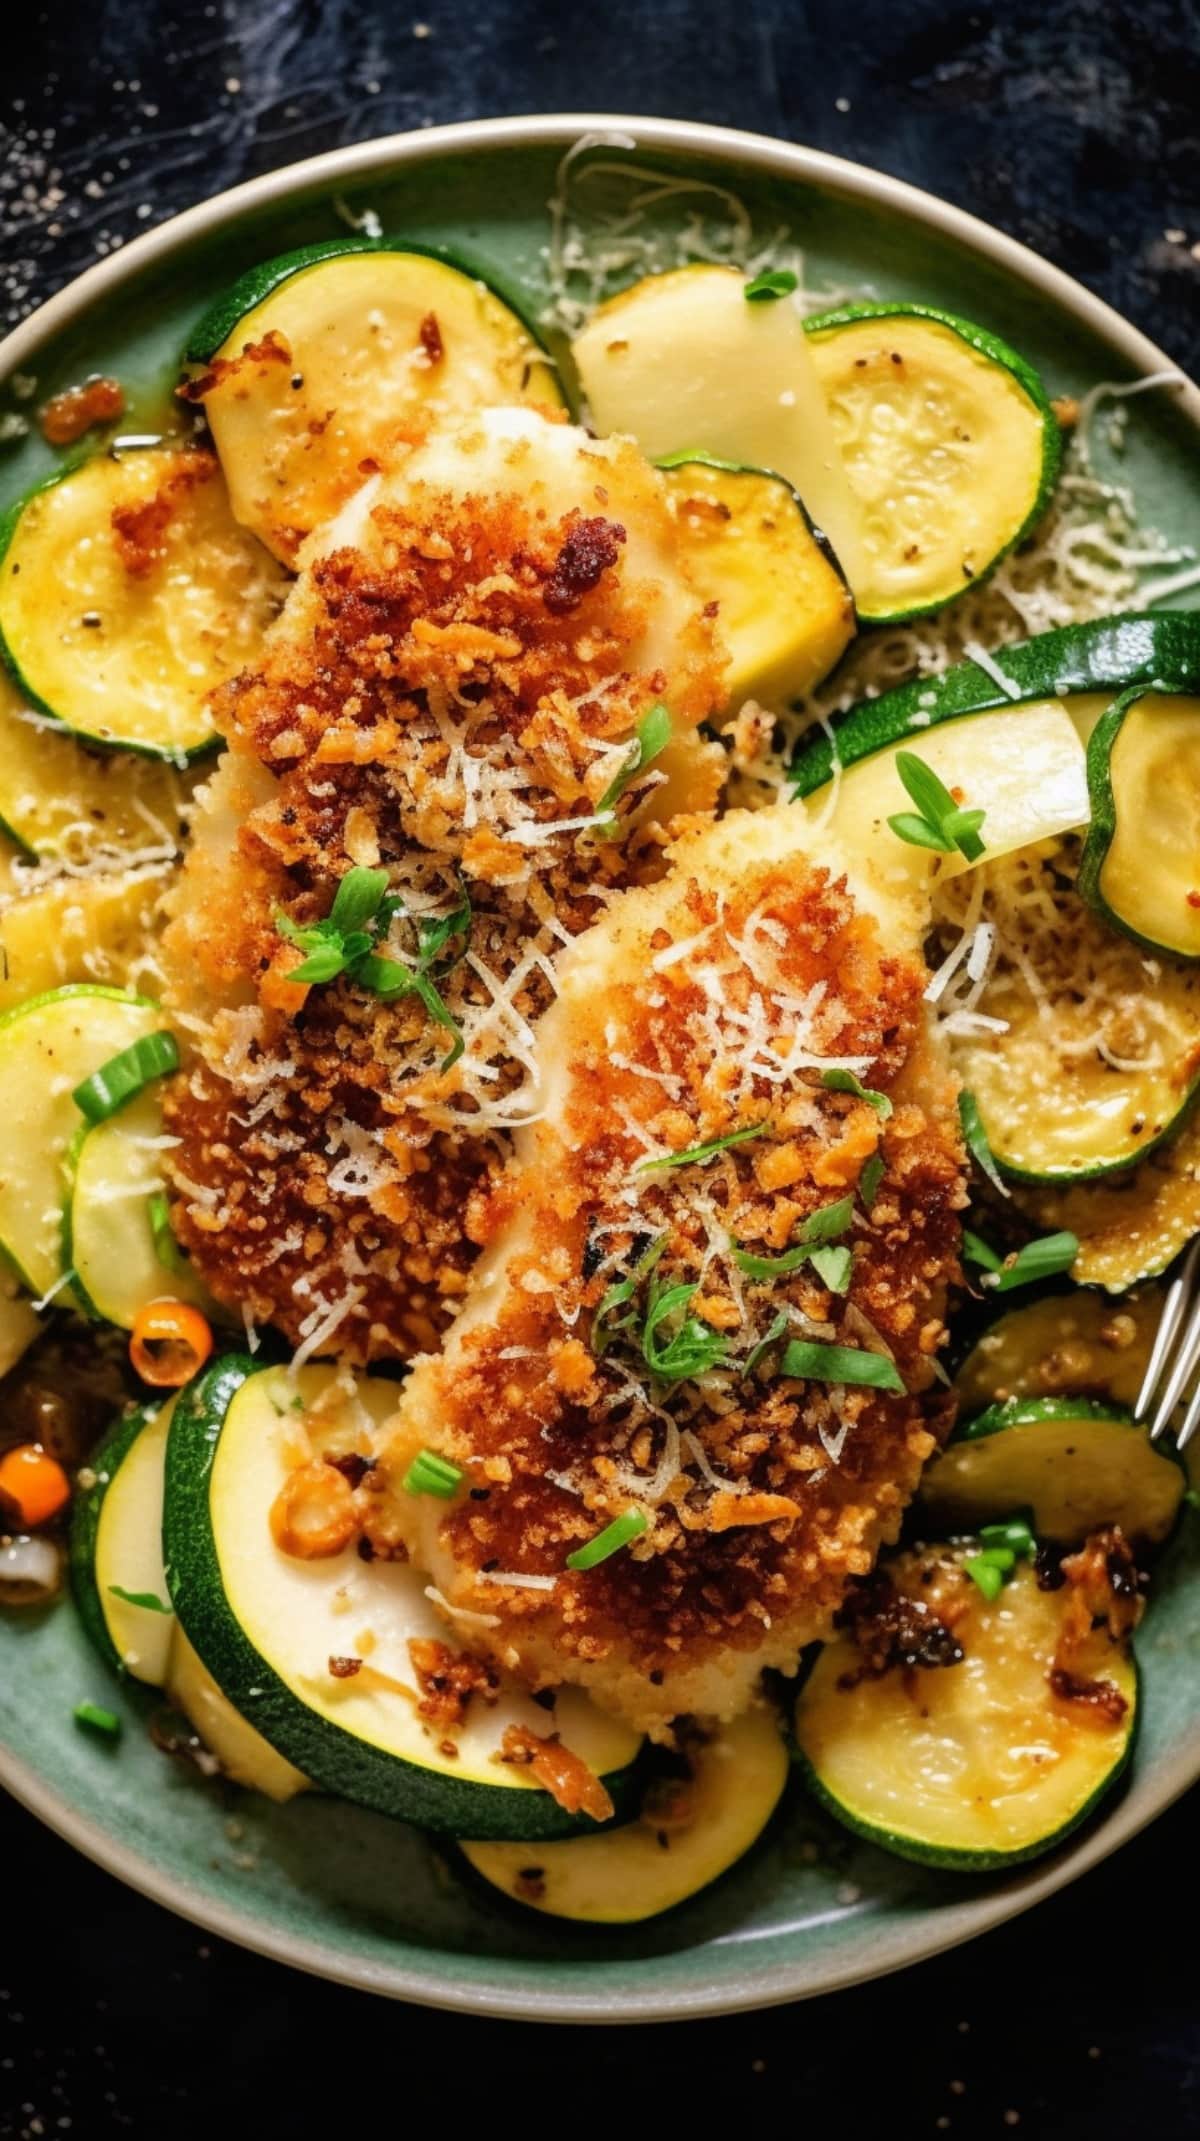 Crispy Parmesan Chicken with baked zucchini